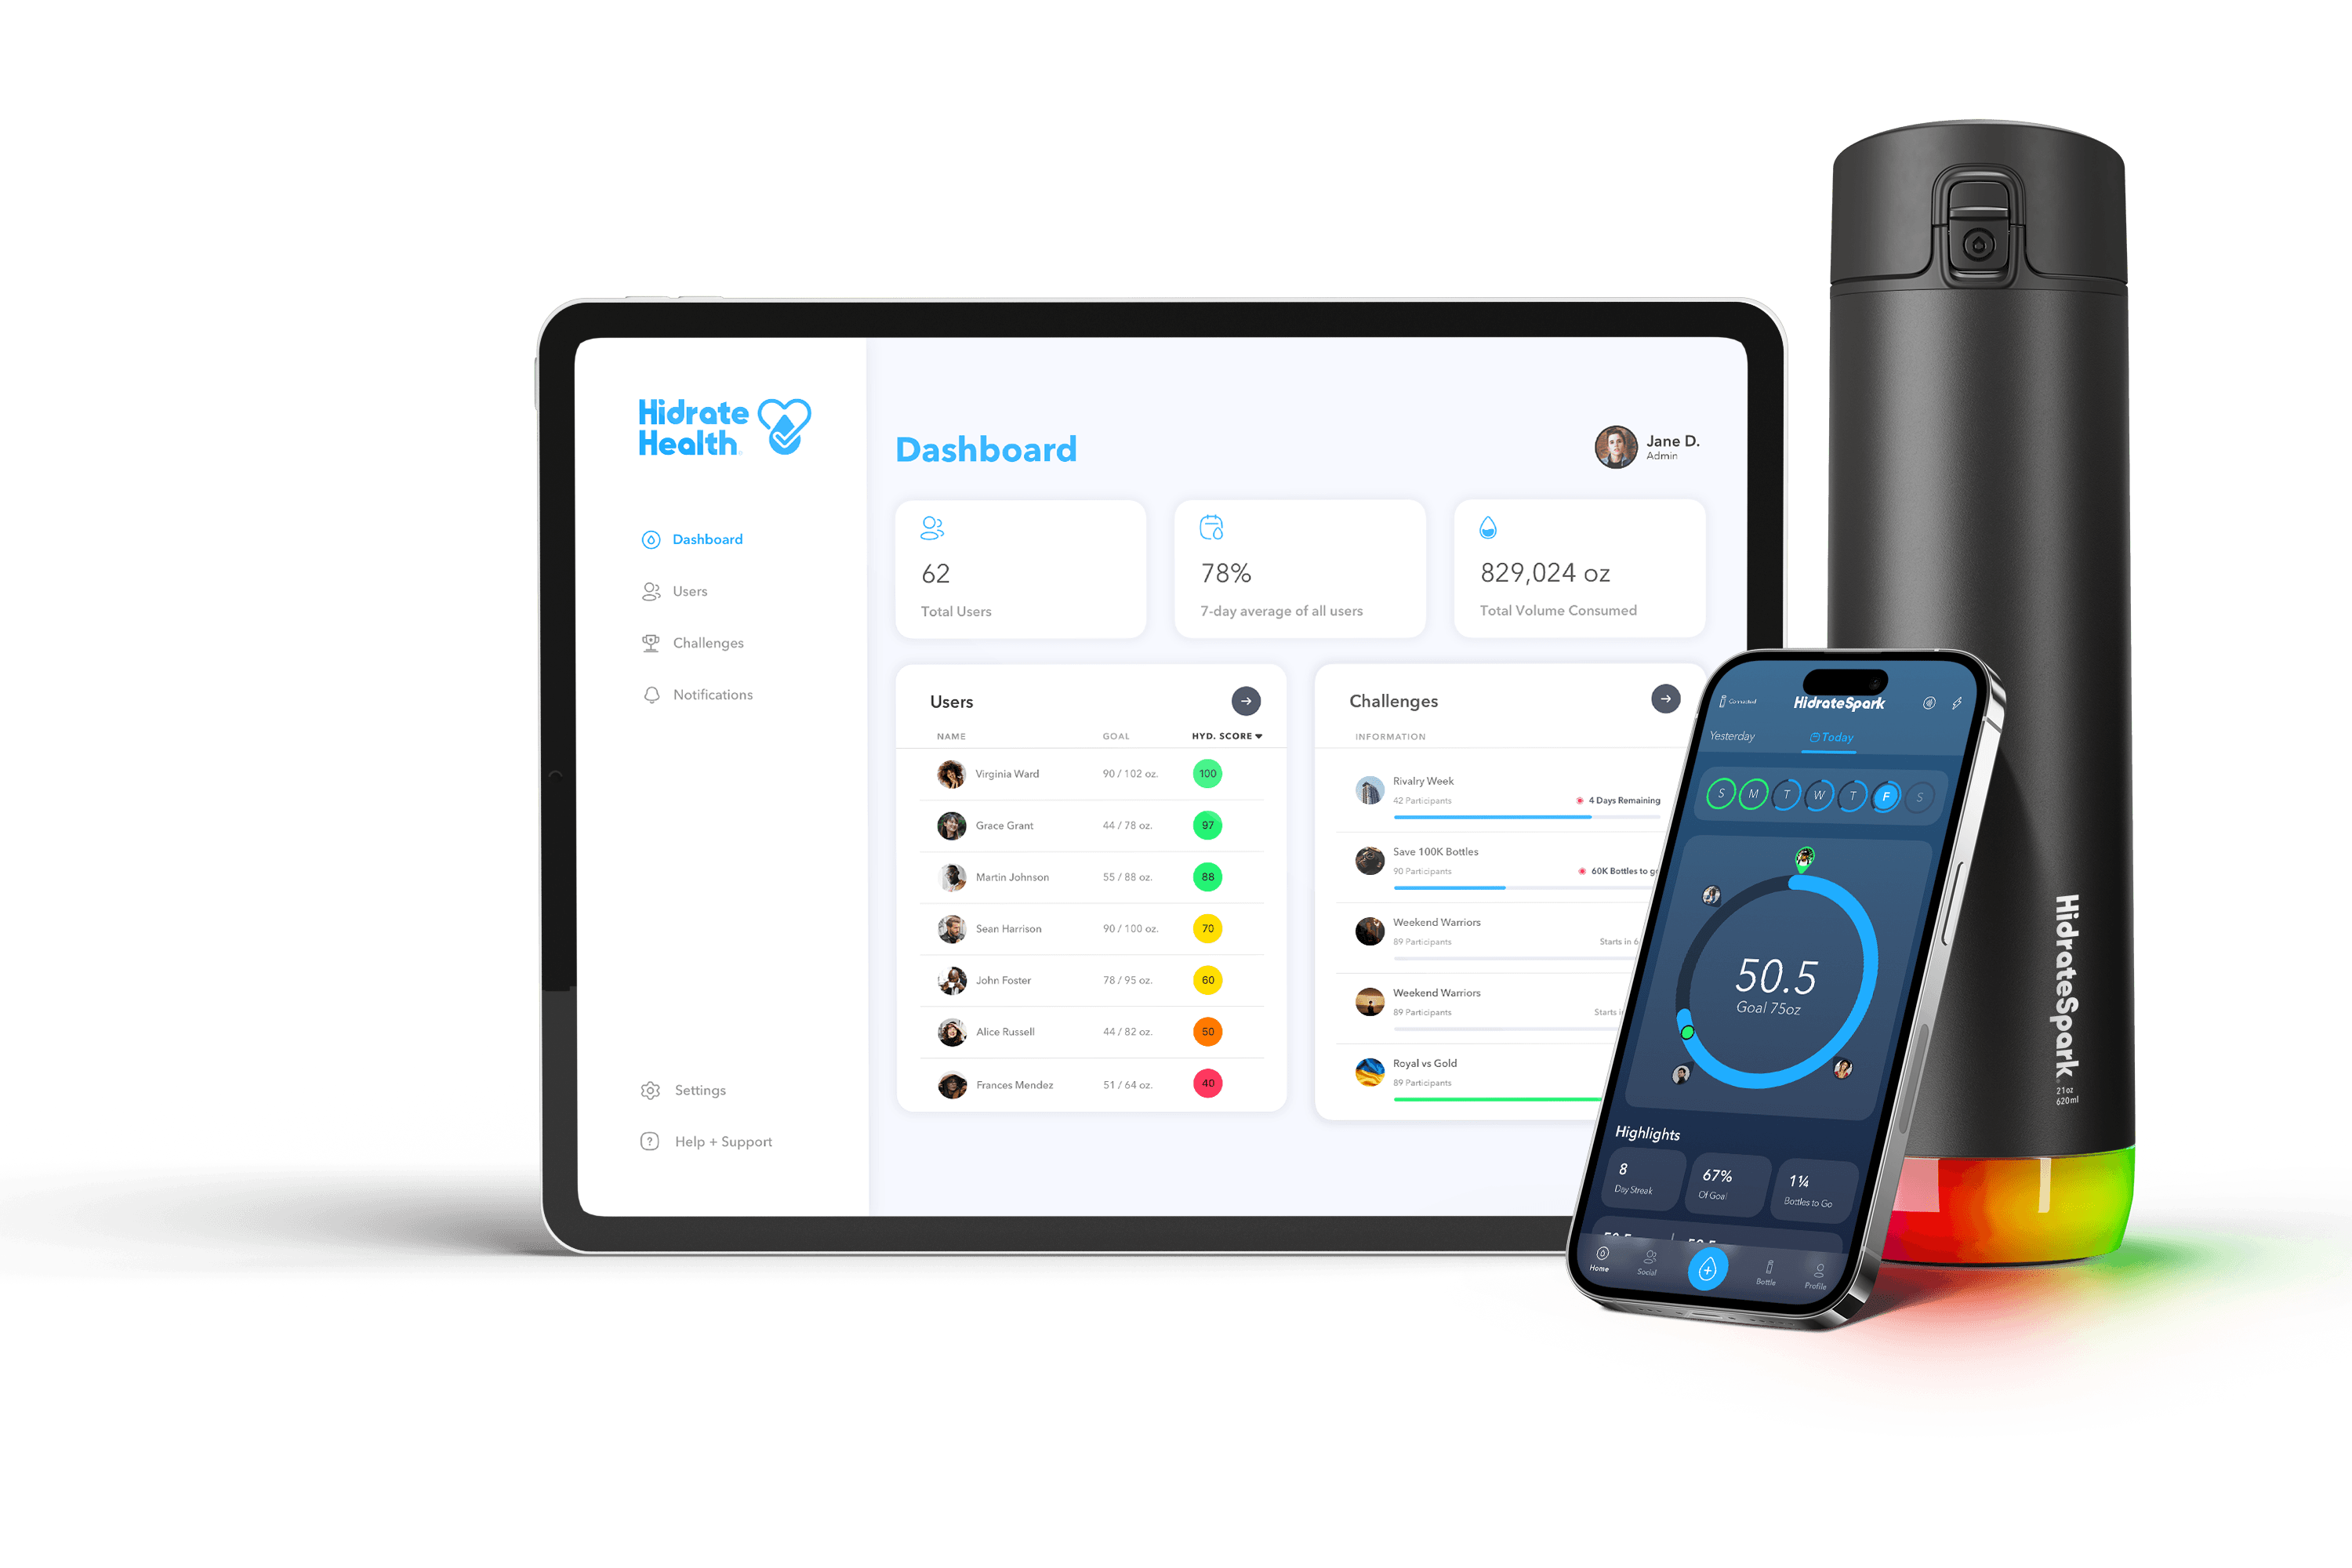 Hidrate Health devices